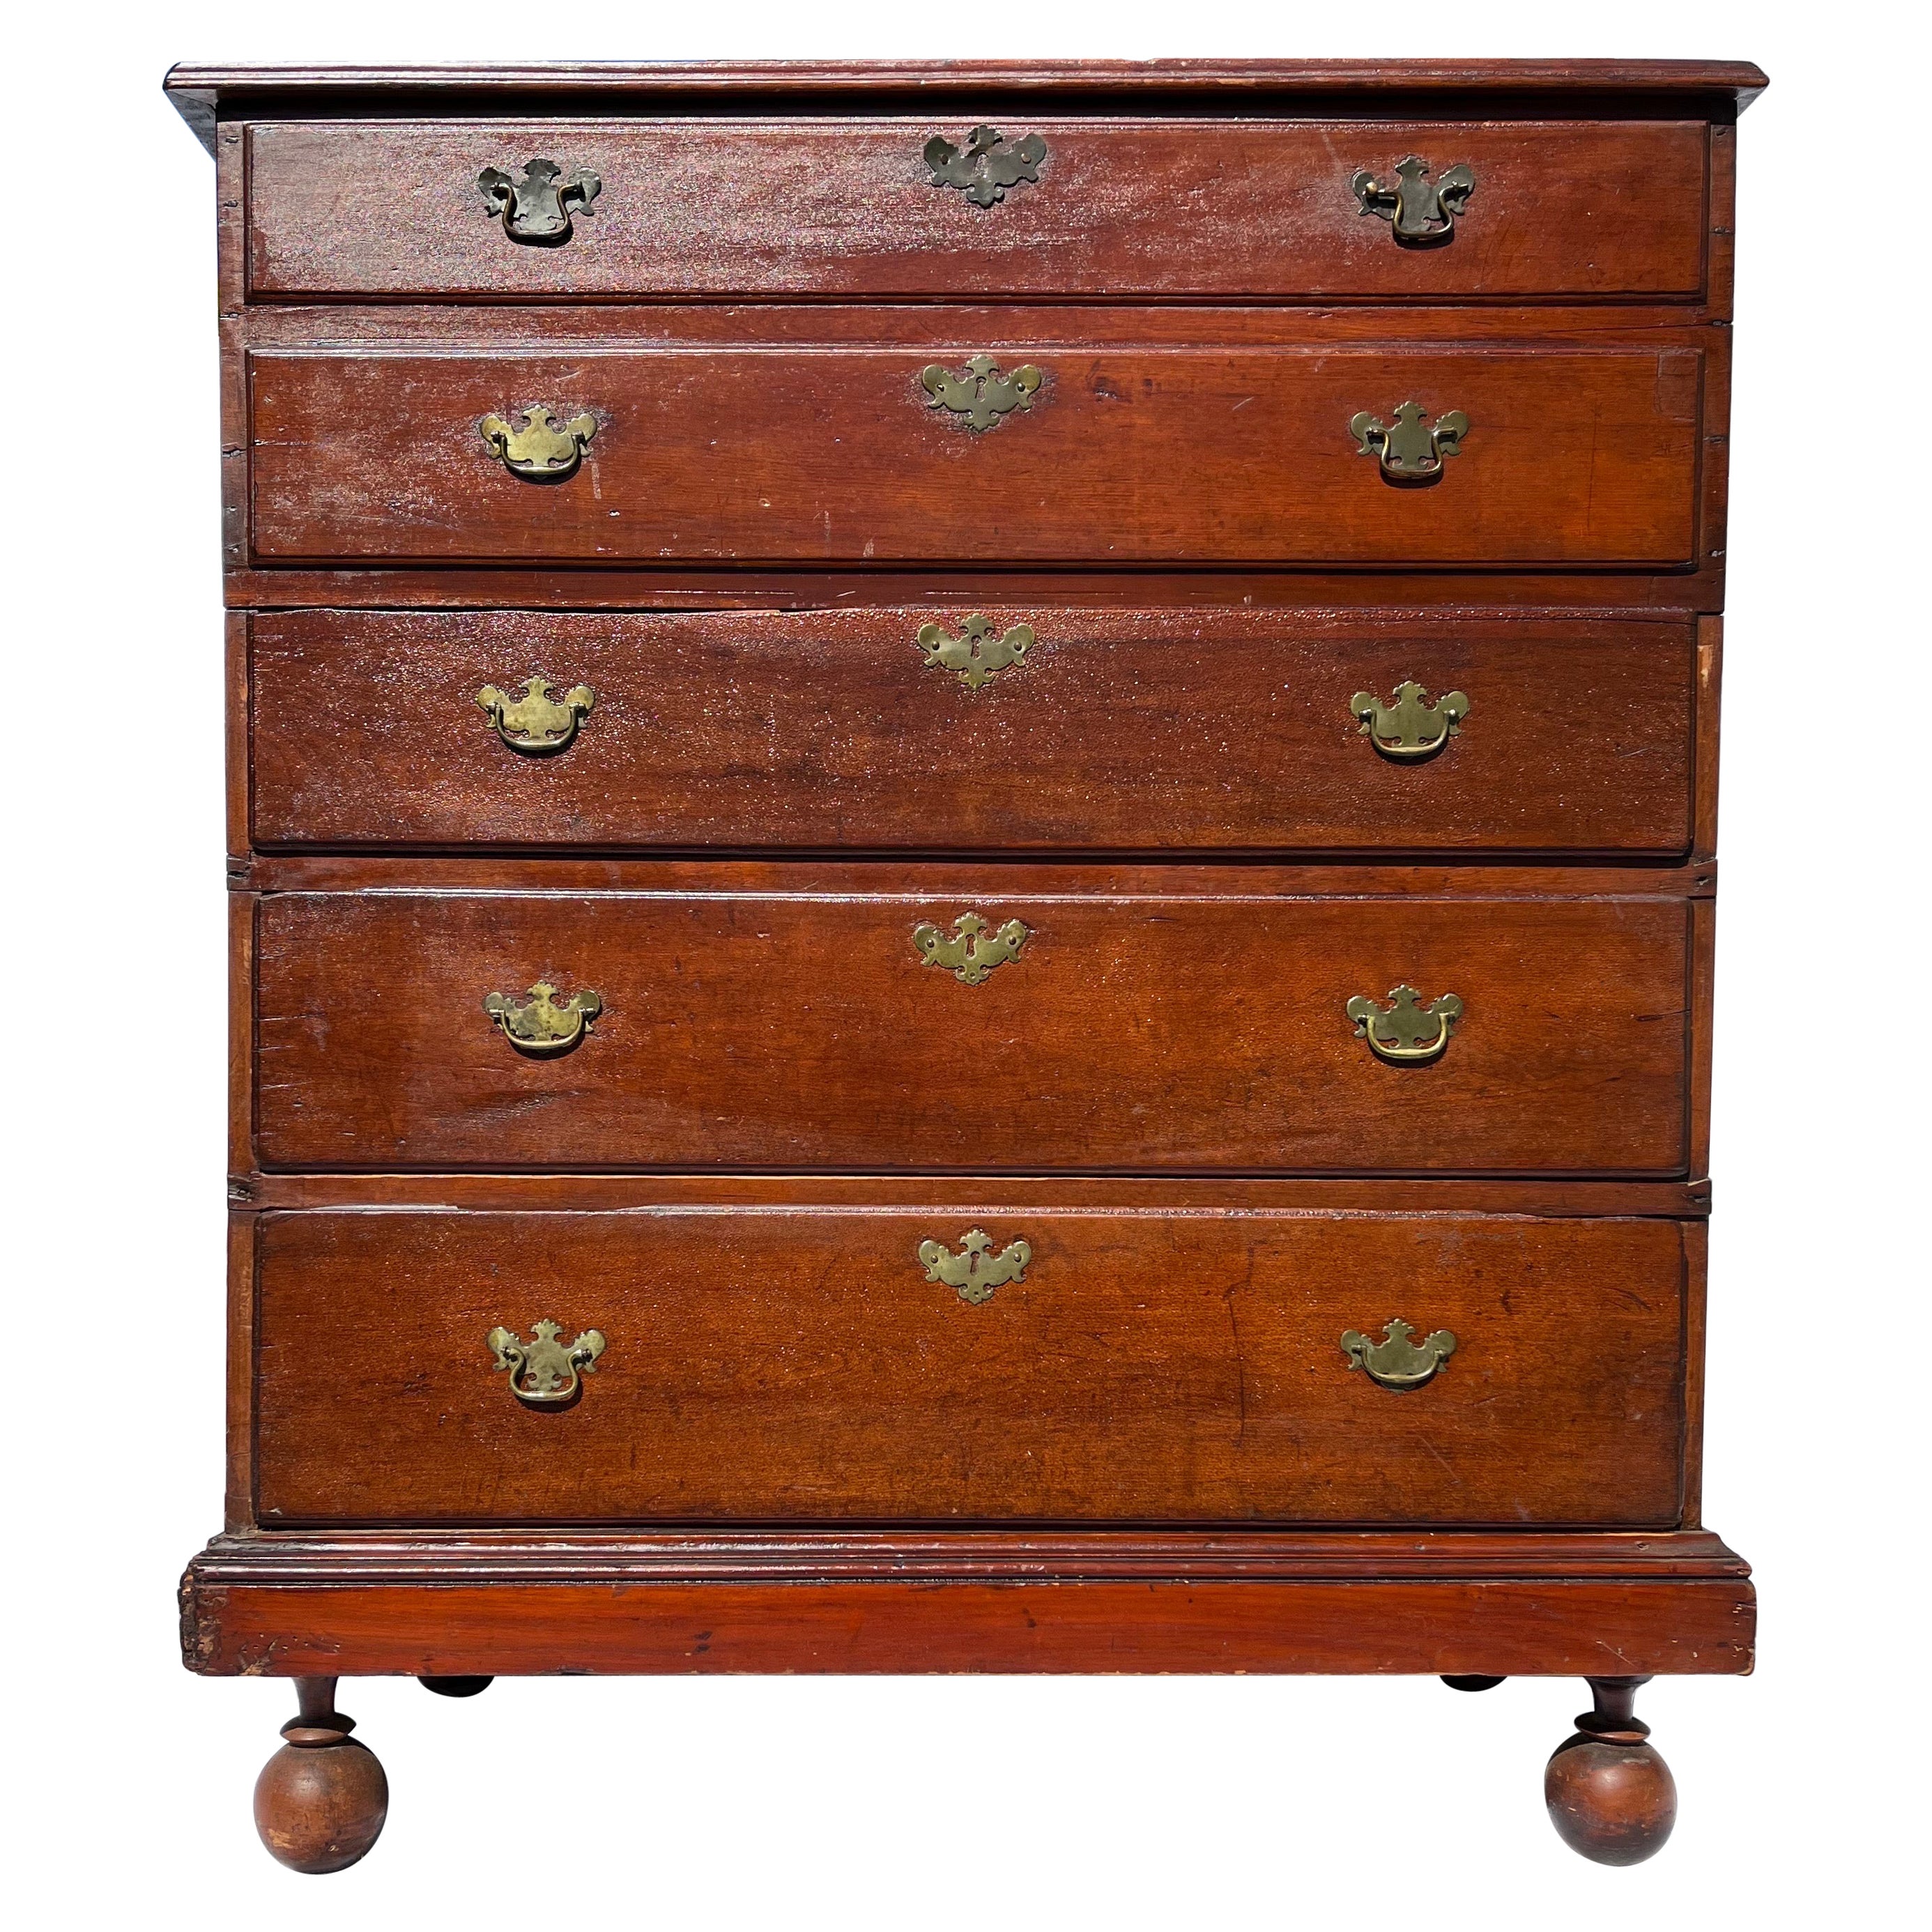 Antique William and Mary Style 19th Century Mule Chest of Drawers with Blanket